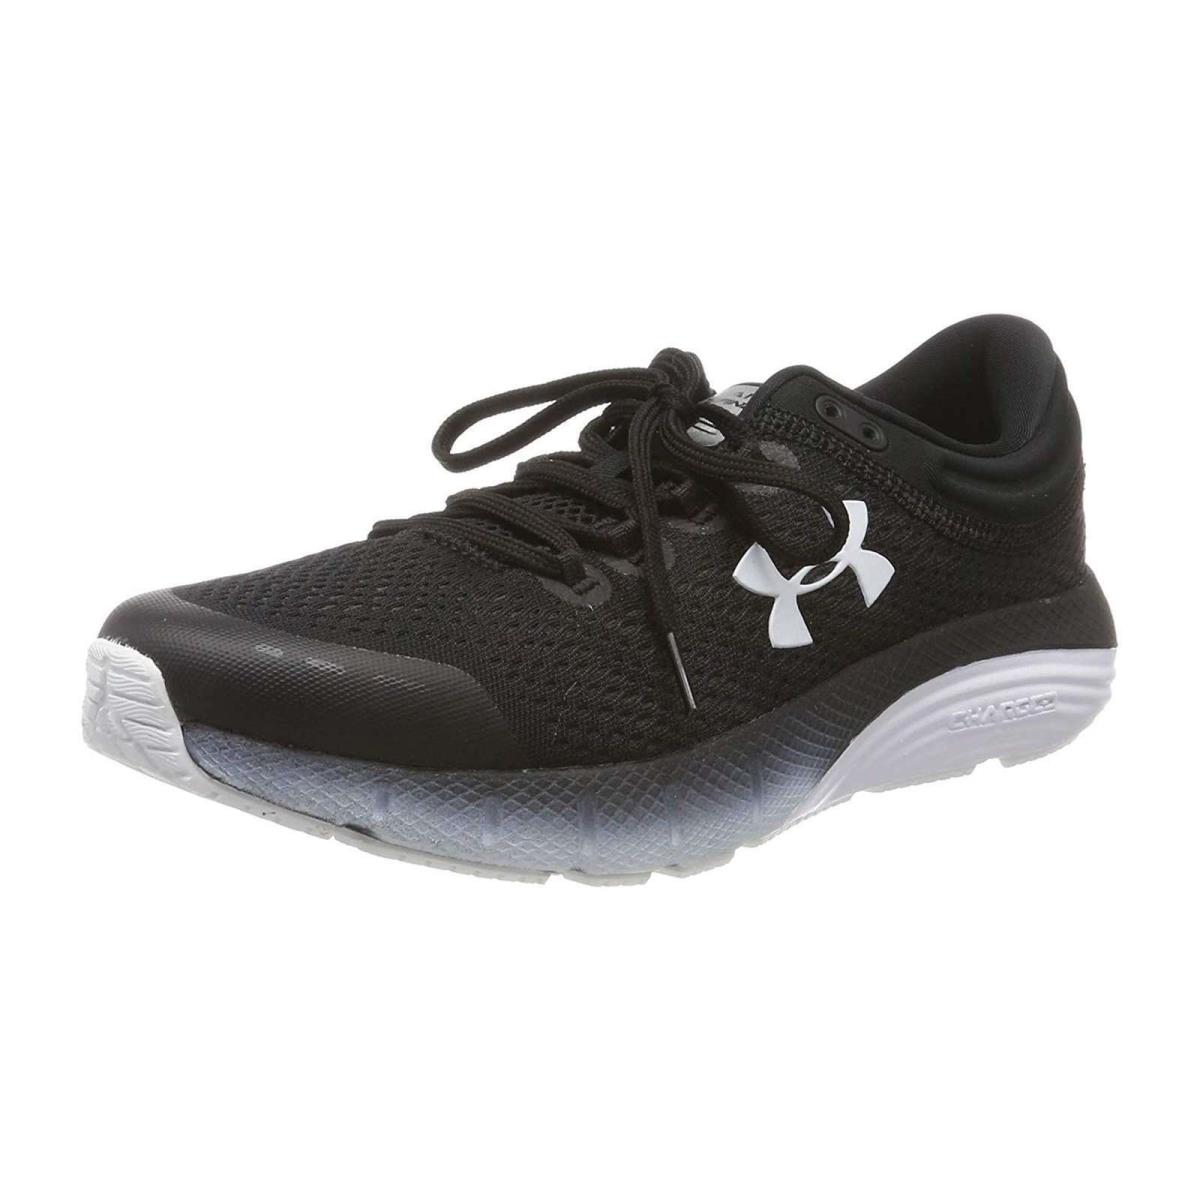 Under Armour Women s Athletic Sneakers Charged Bandit 5 Running Lace-up Shoes Black / White